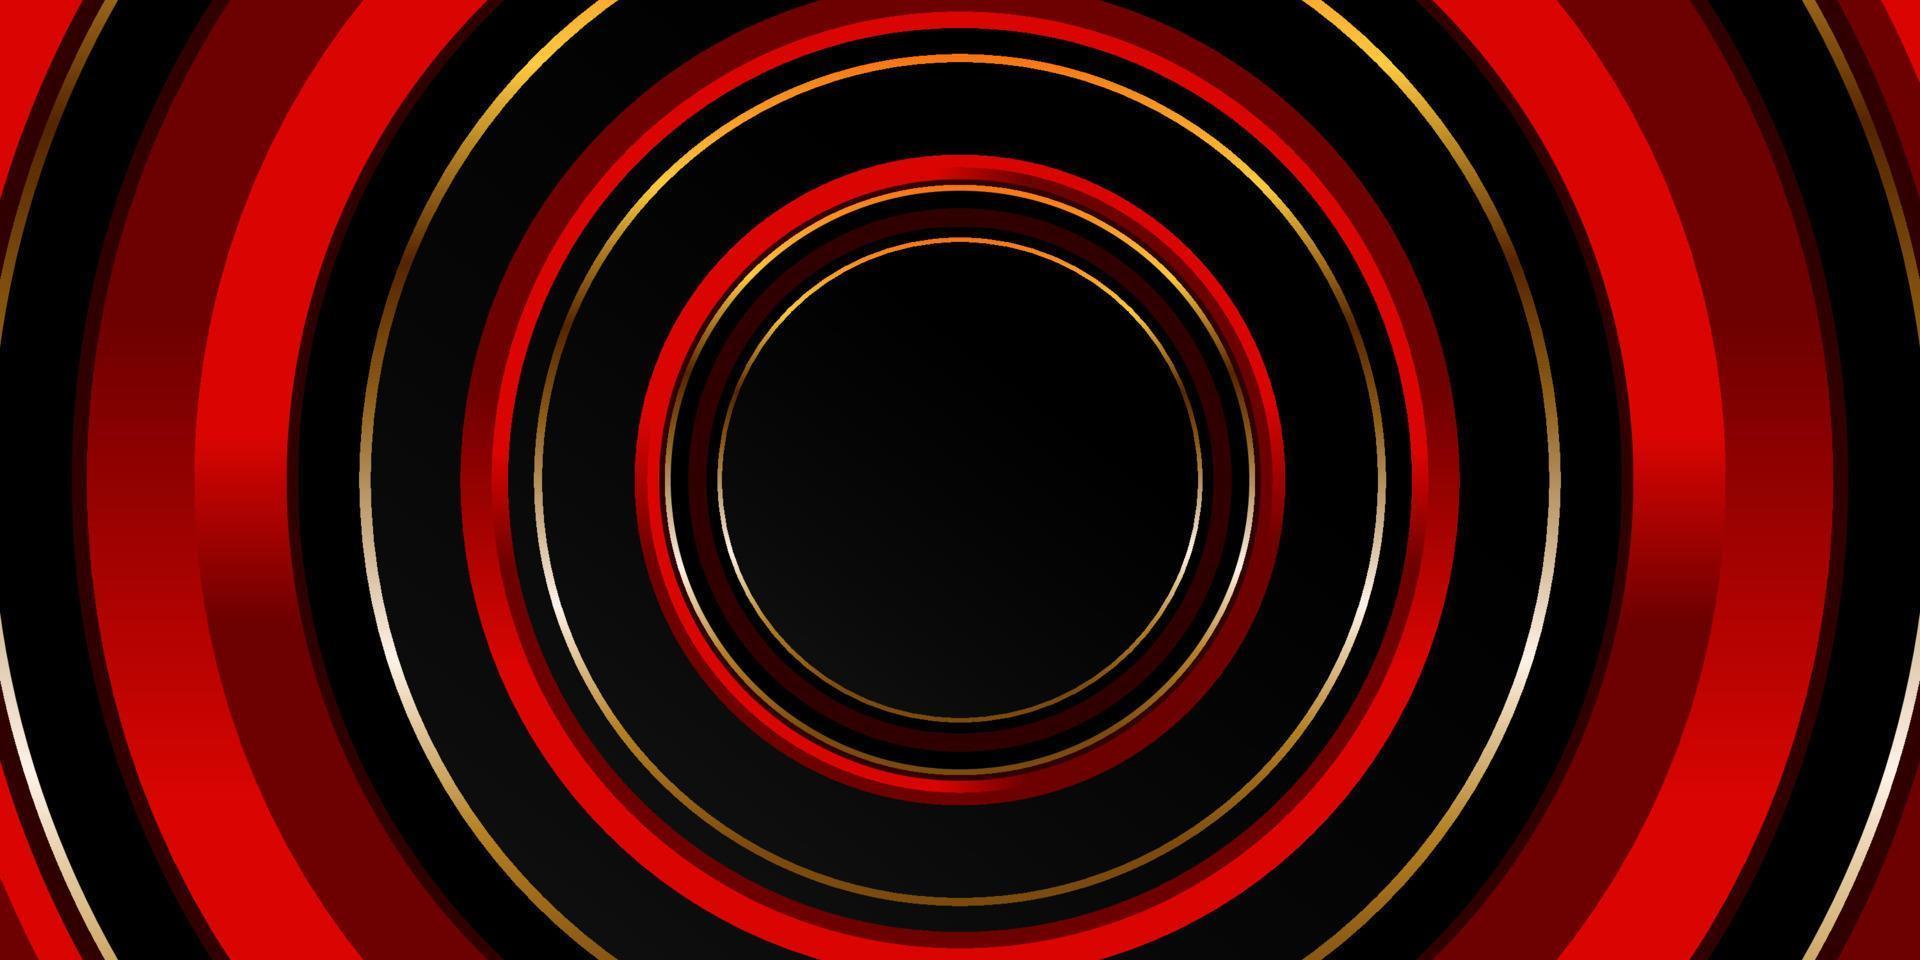 Black and red background with golden line. Abstract geometric background. Circle shaped surface. 3d backdrop. Vector illustration.